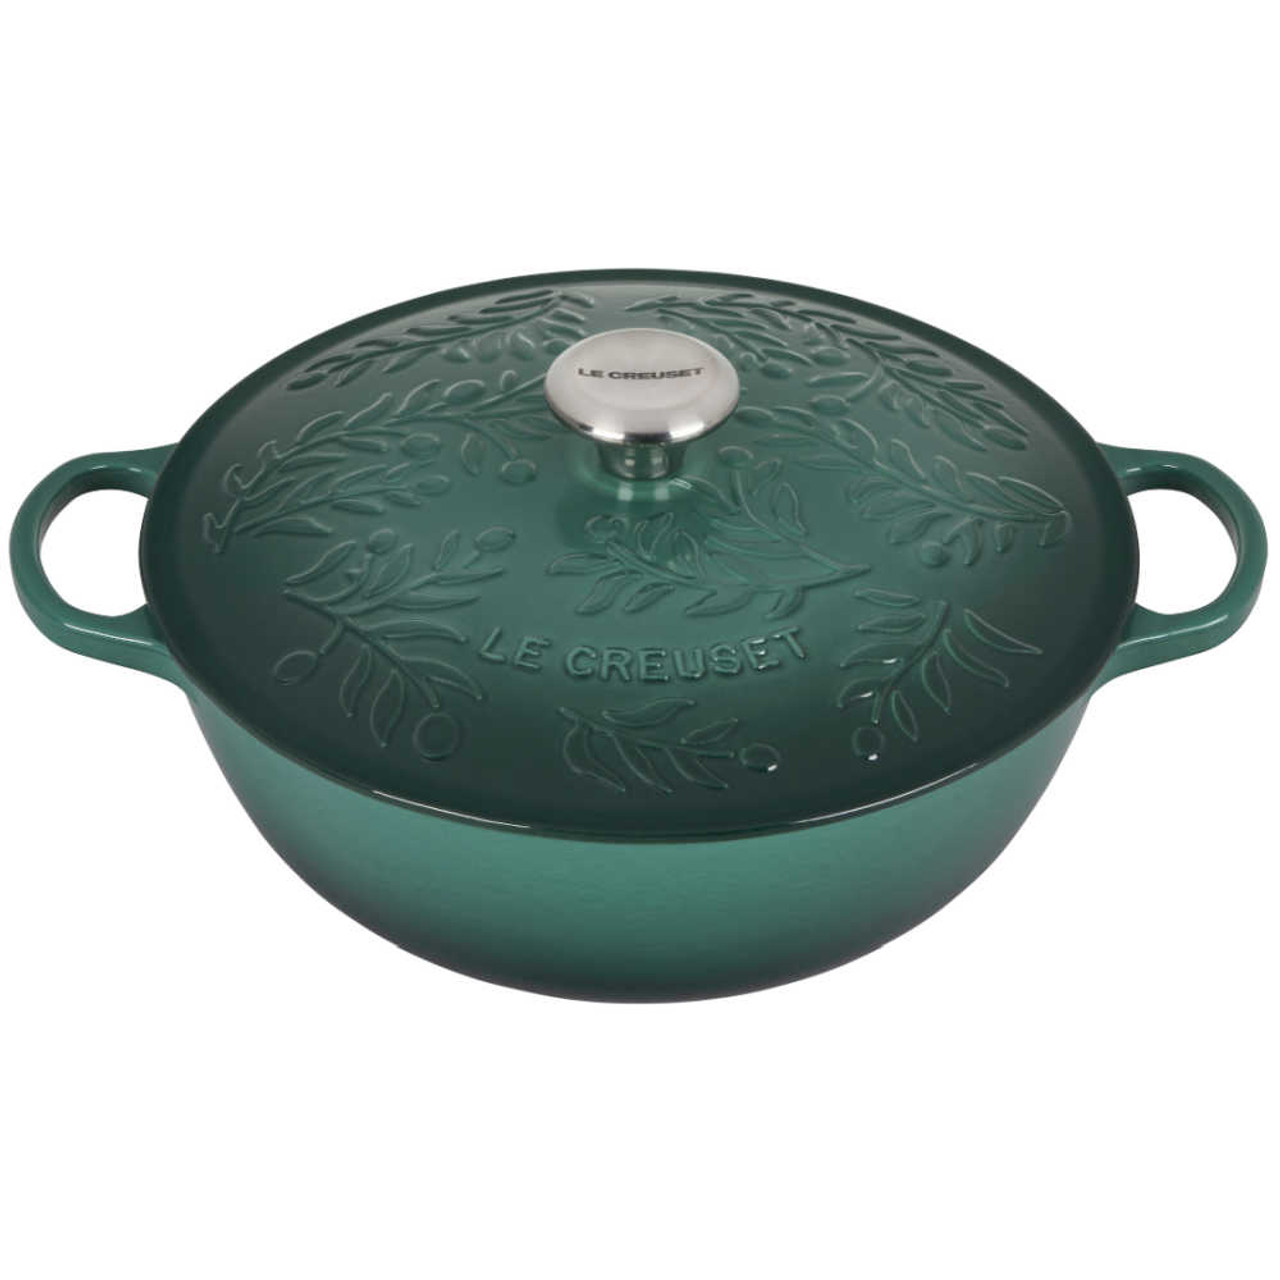 https://cdn11.bigcommerce.com/s-hccytny0od/images/stencil/1280x1280/products/4937/20948/Le_Creuset_Olive_Branch_Collection_Soup_Pot_in_Artichaut__30595.1659491213.jpg?c=2?imbypass=on